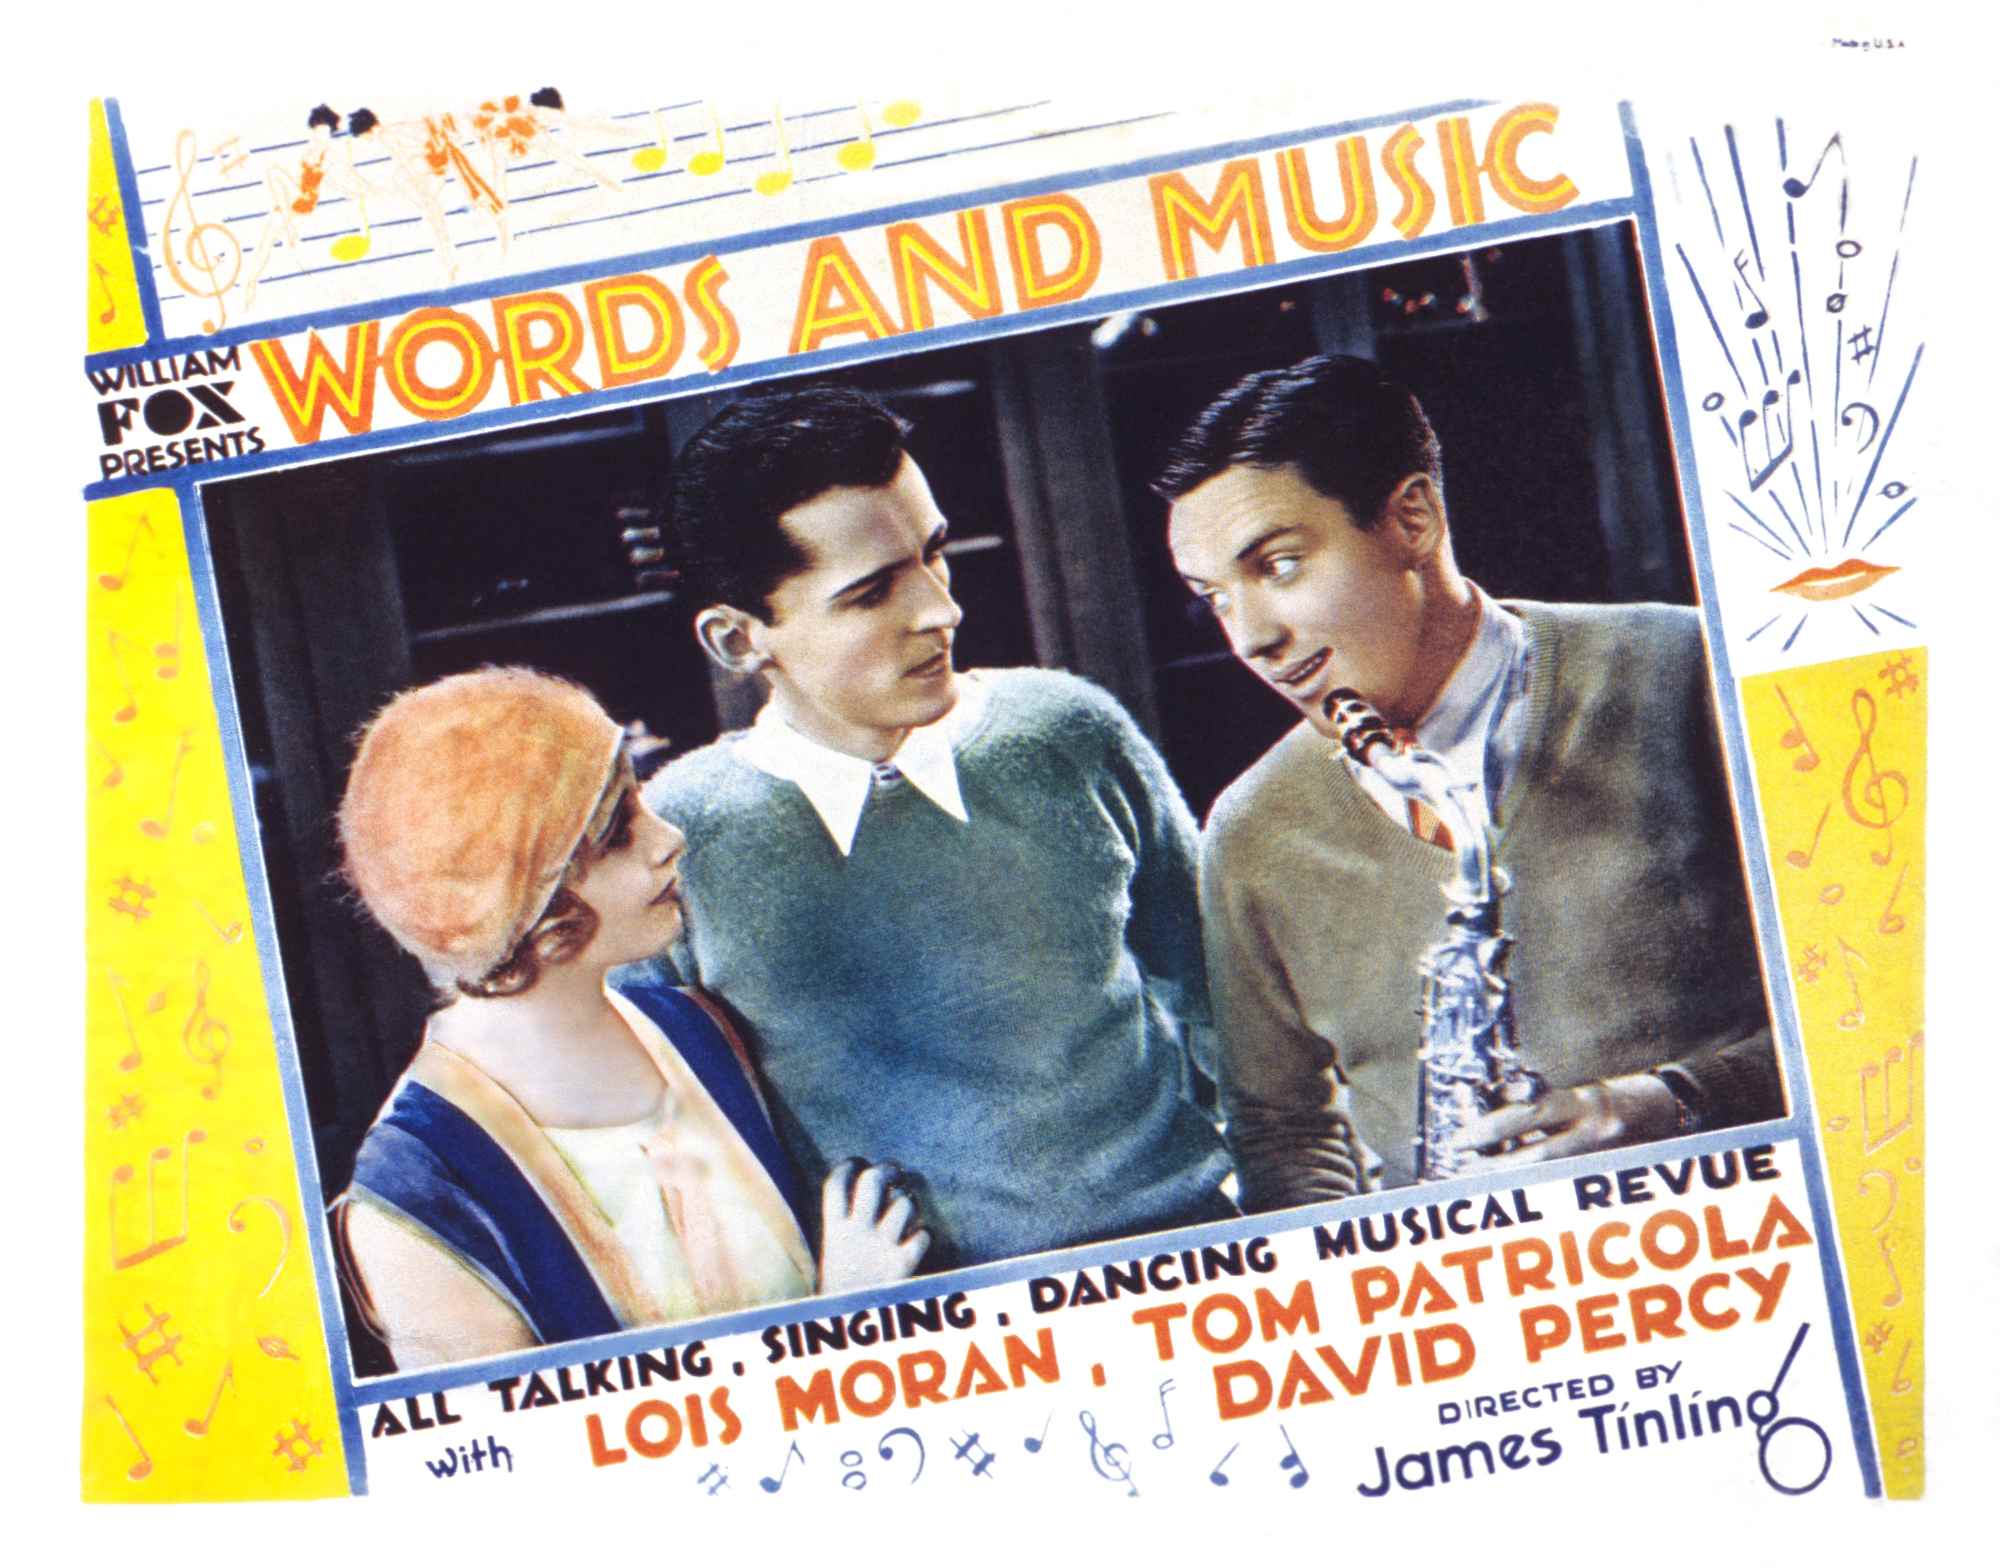 'Words and Music' Lois Moran as Mary Brown, David Percy as Phil Denning, and Frank Albertson as Skeet Mulroy. Mulroy holding a saxophone while Mary and Phil look at him.